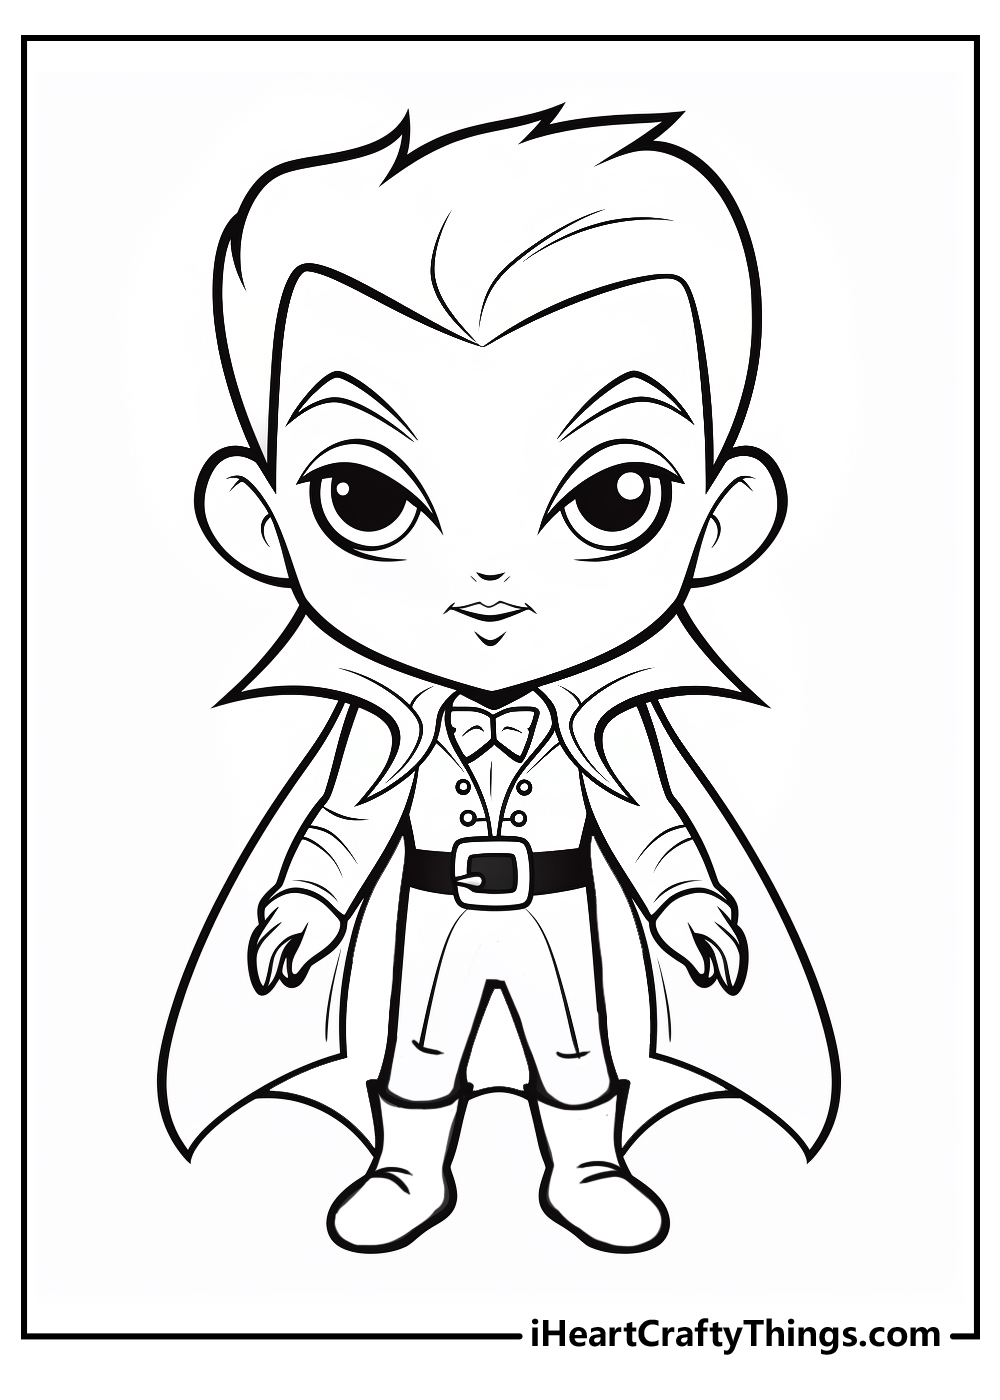 black-and-white vampire coloring sheet